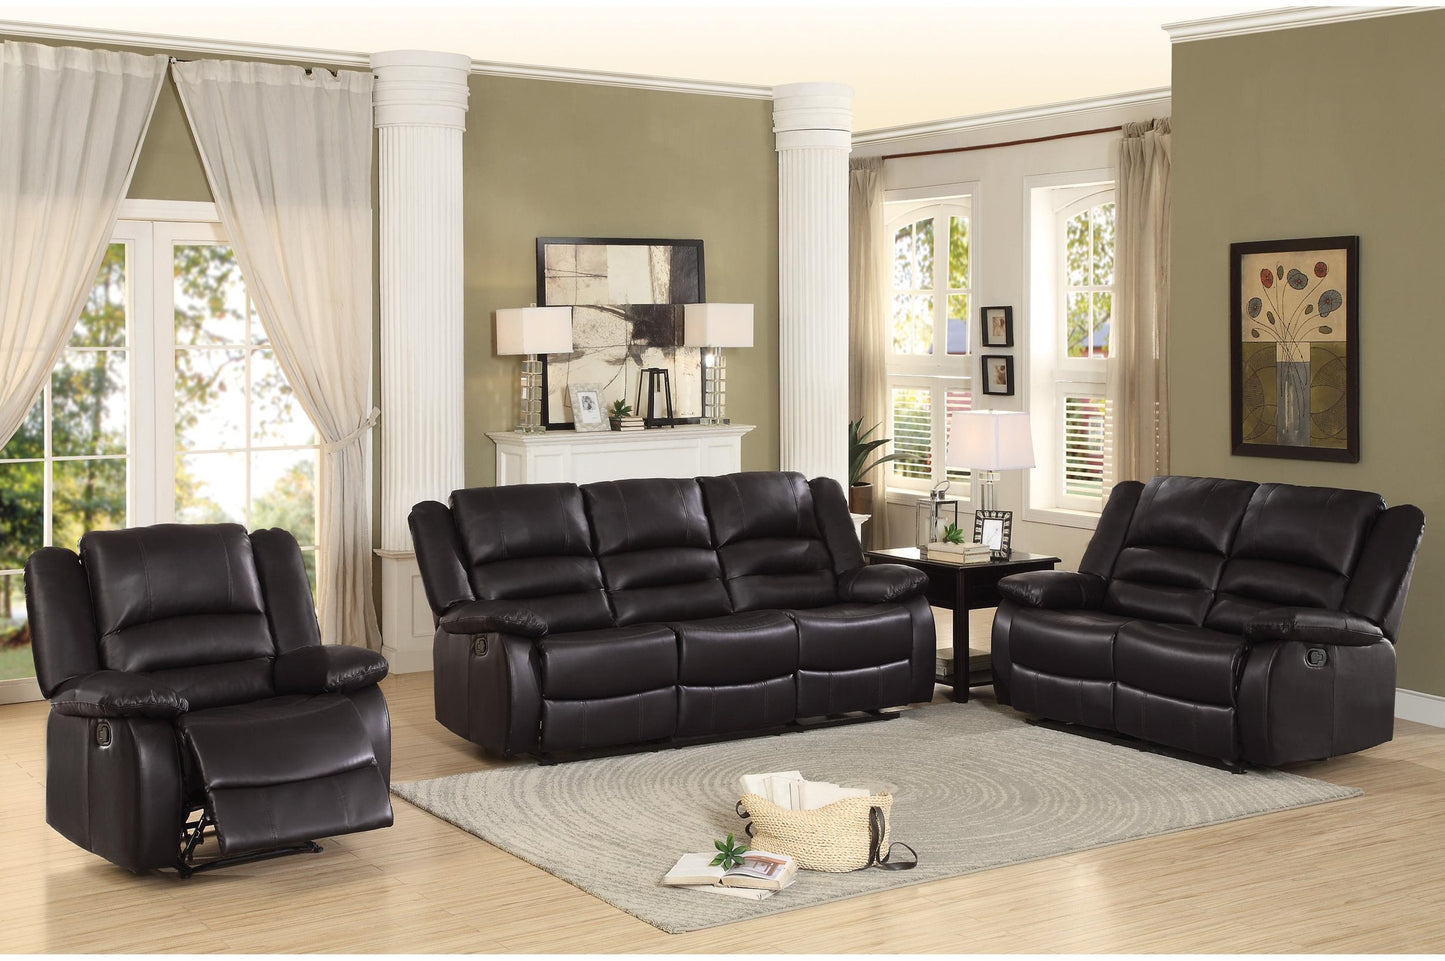 Homelegance Jarita 2PC Double Reclining Love Seat & Recliner Chair in Brown Leather